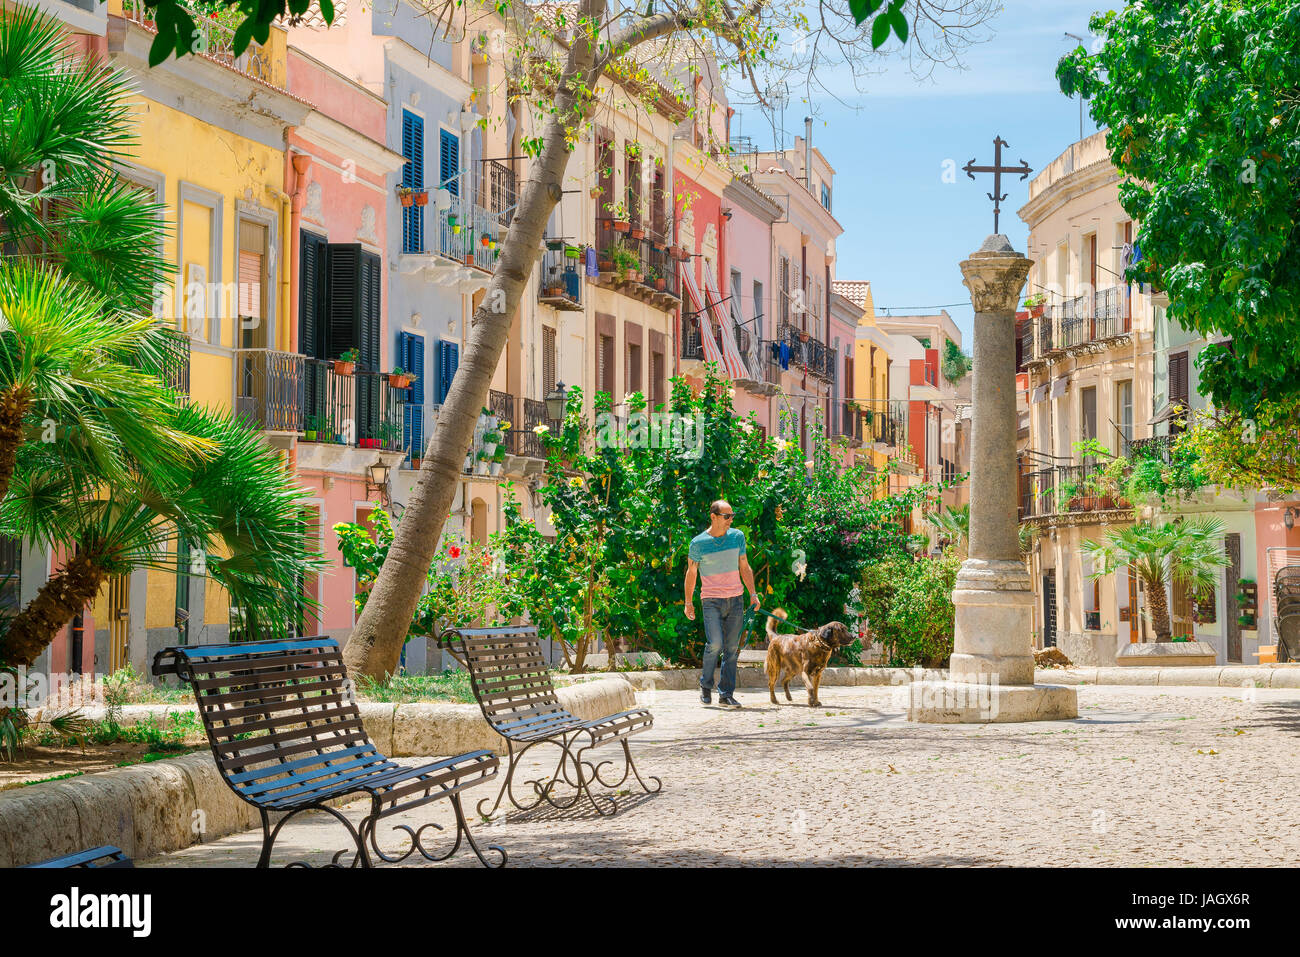 Travel Europe, view of a man walking his dog in the middle of a Mediterranean city, Europe. Stock Photo